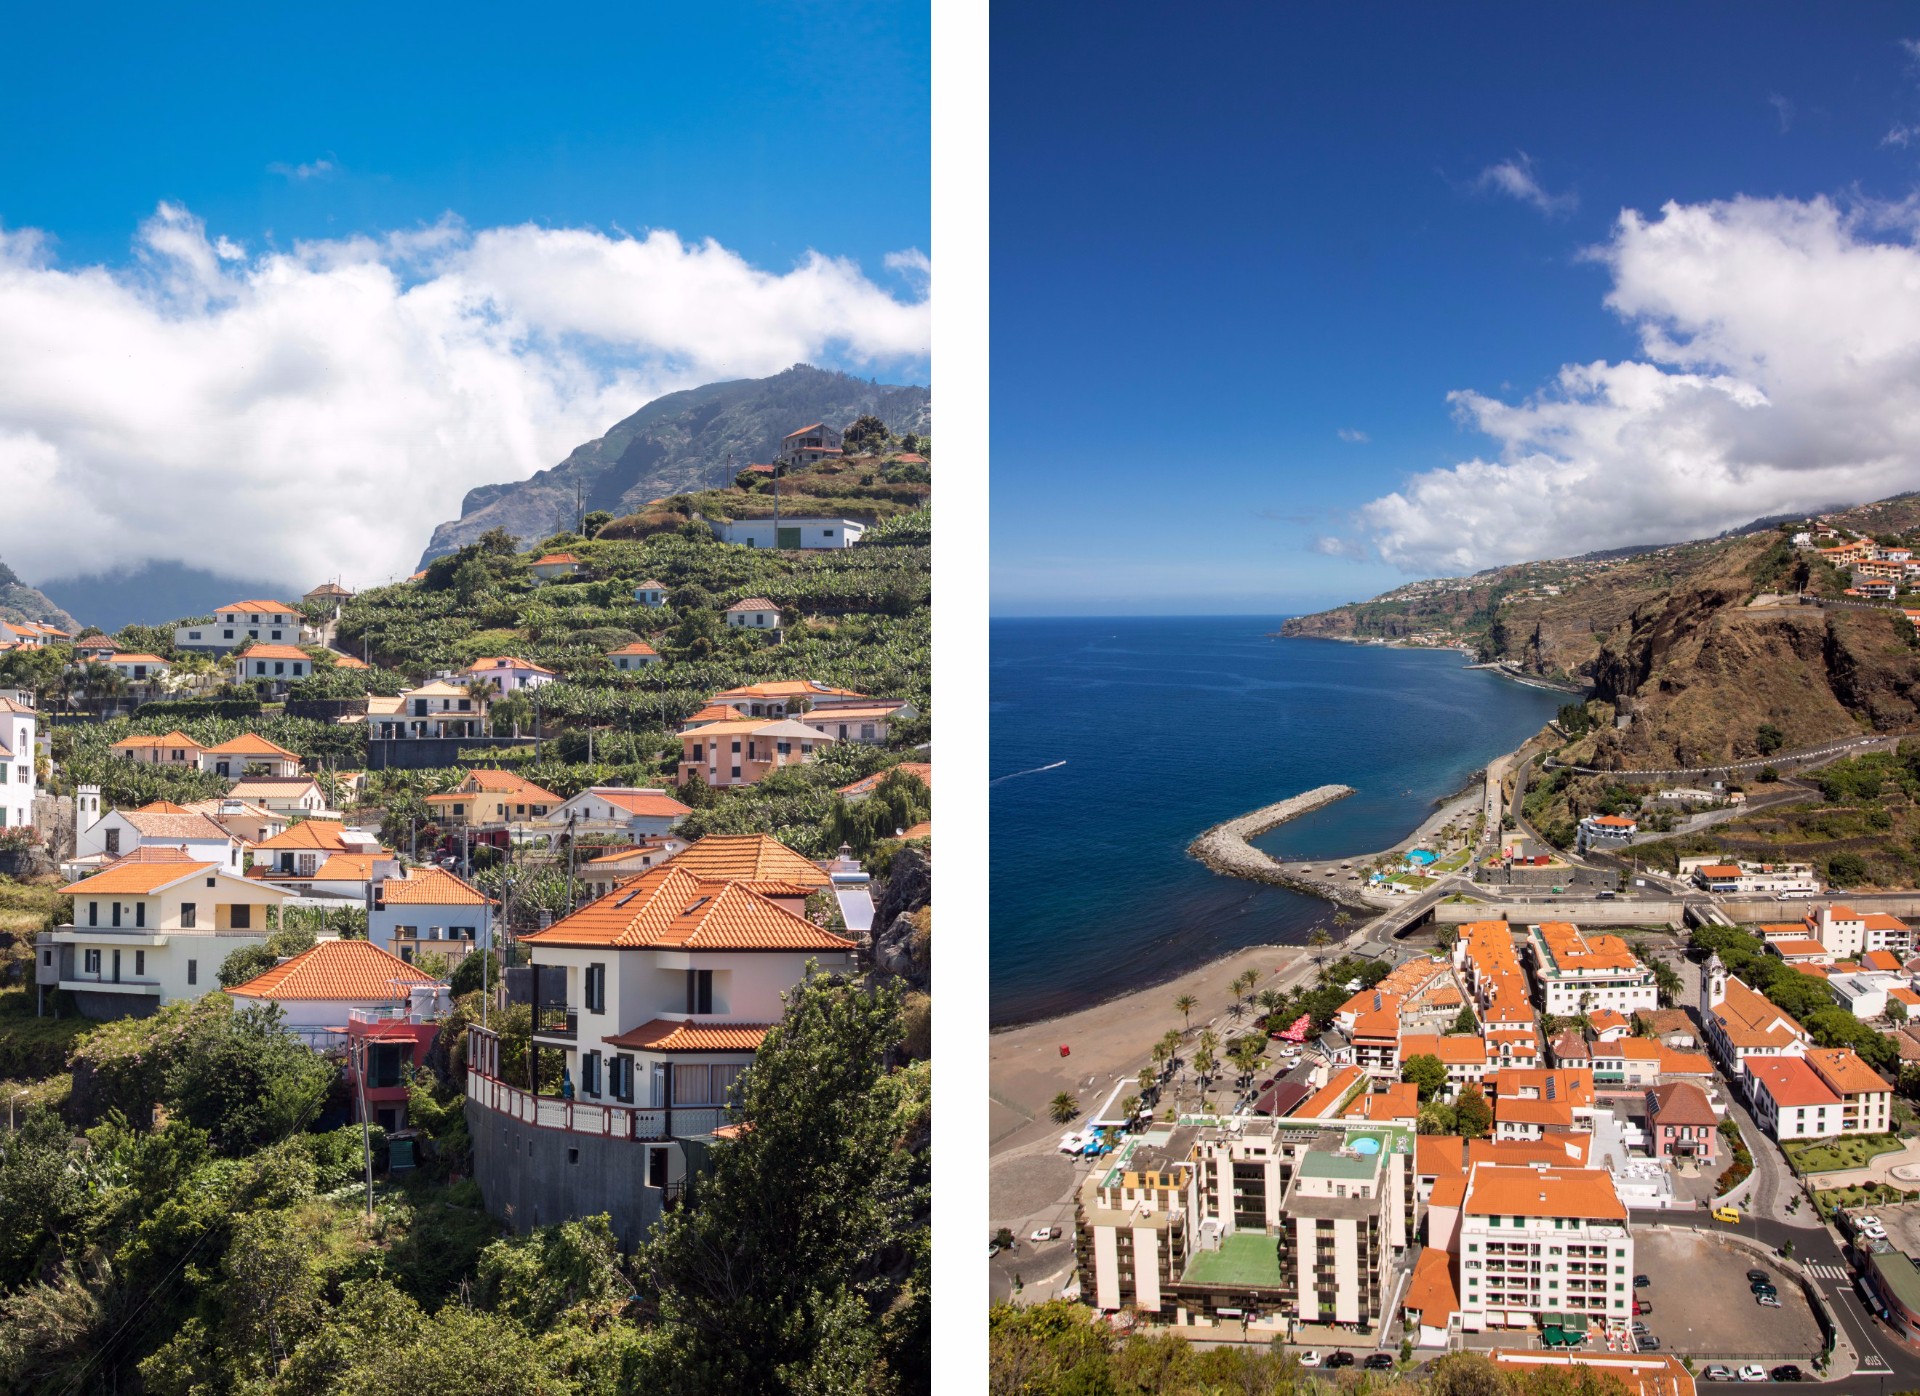 amazing-views-of-orange-roofed-houses-surrounded-by-trees-by-the-coast-in-ribeira-brava